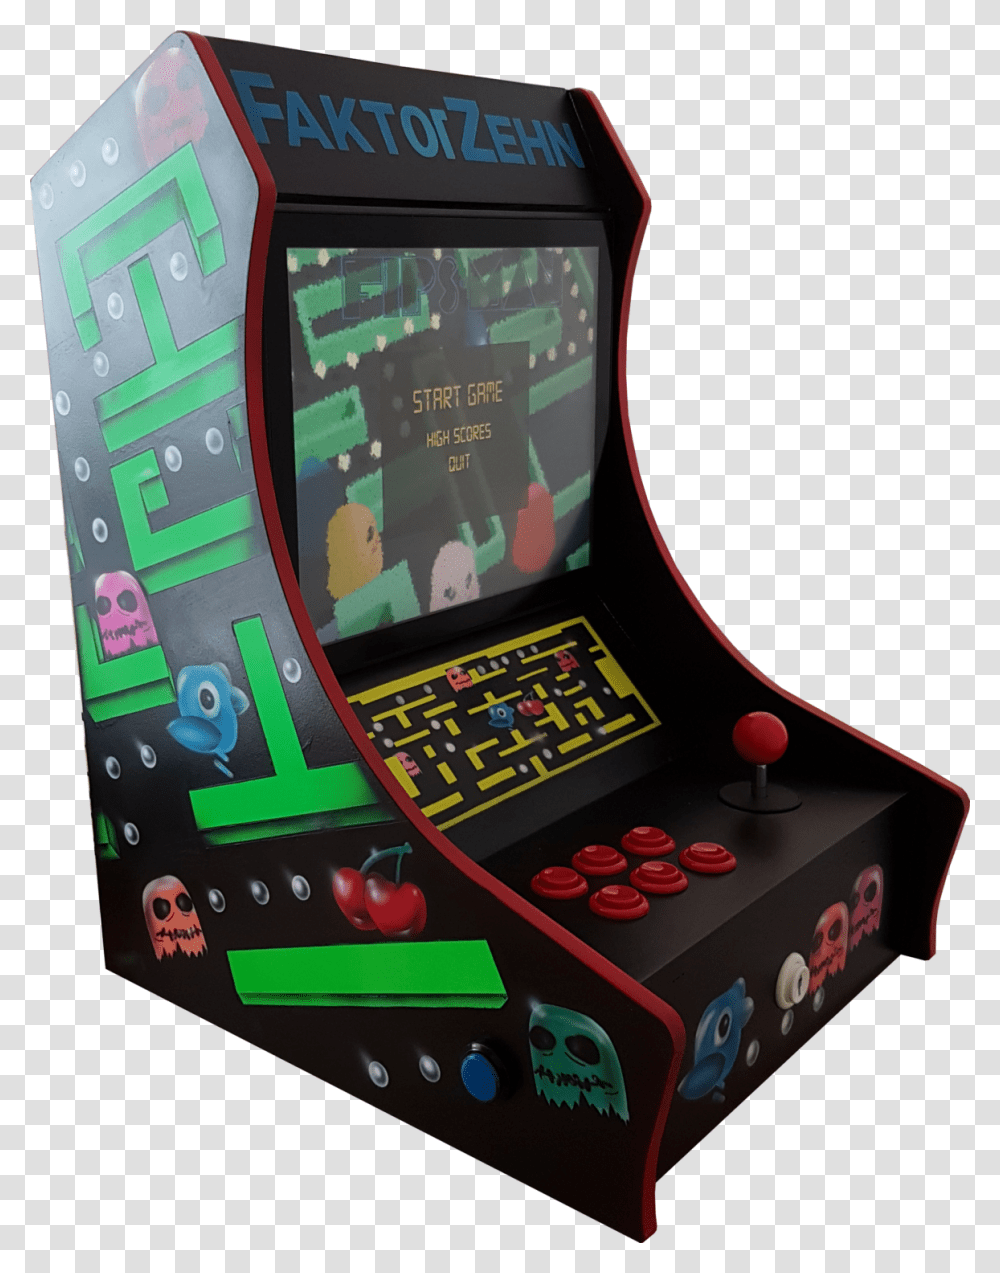 Video Game Arcade Cabinet, Mobile Phone, Electronics, Cell Phone, Arcade Game Machine Transparent Png